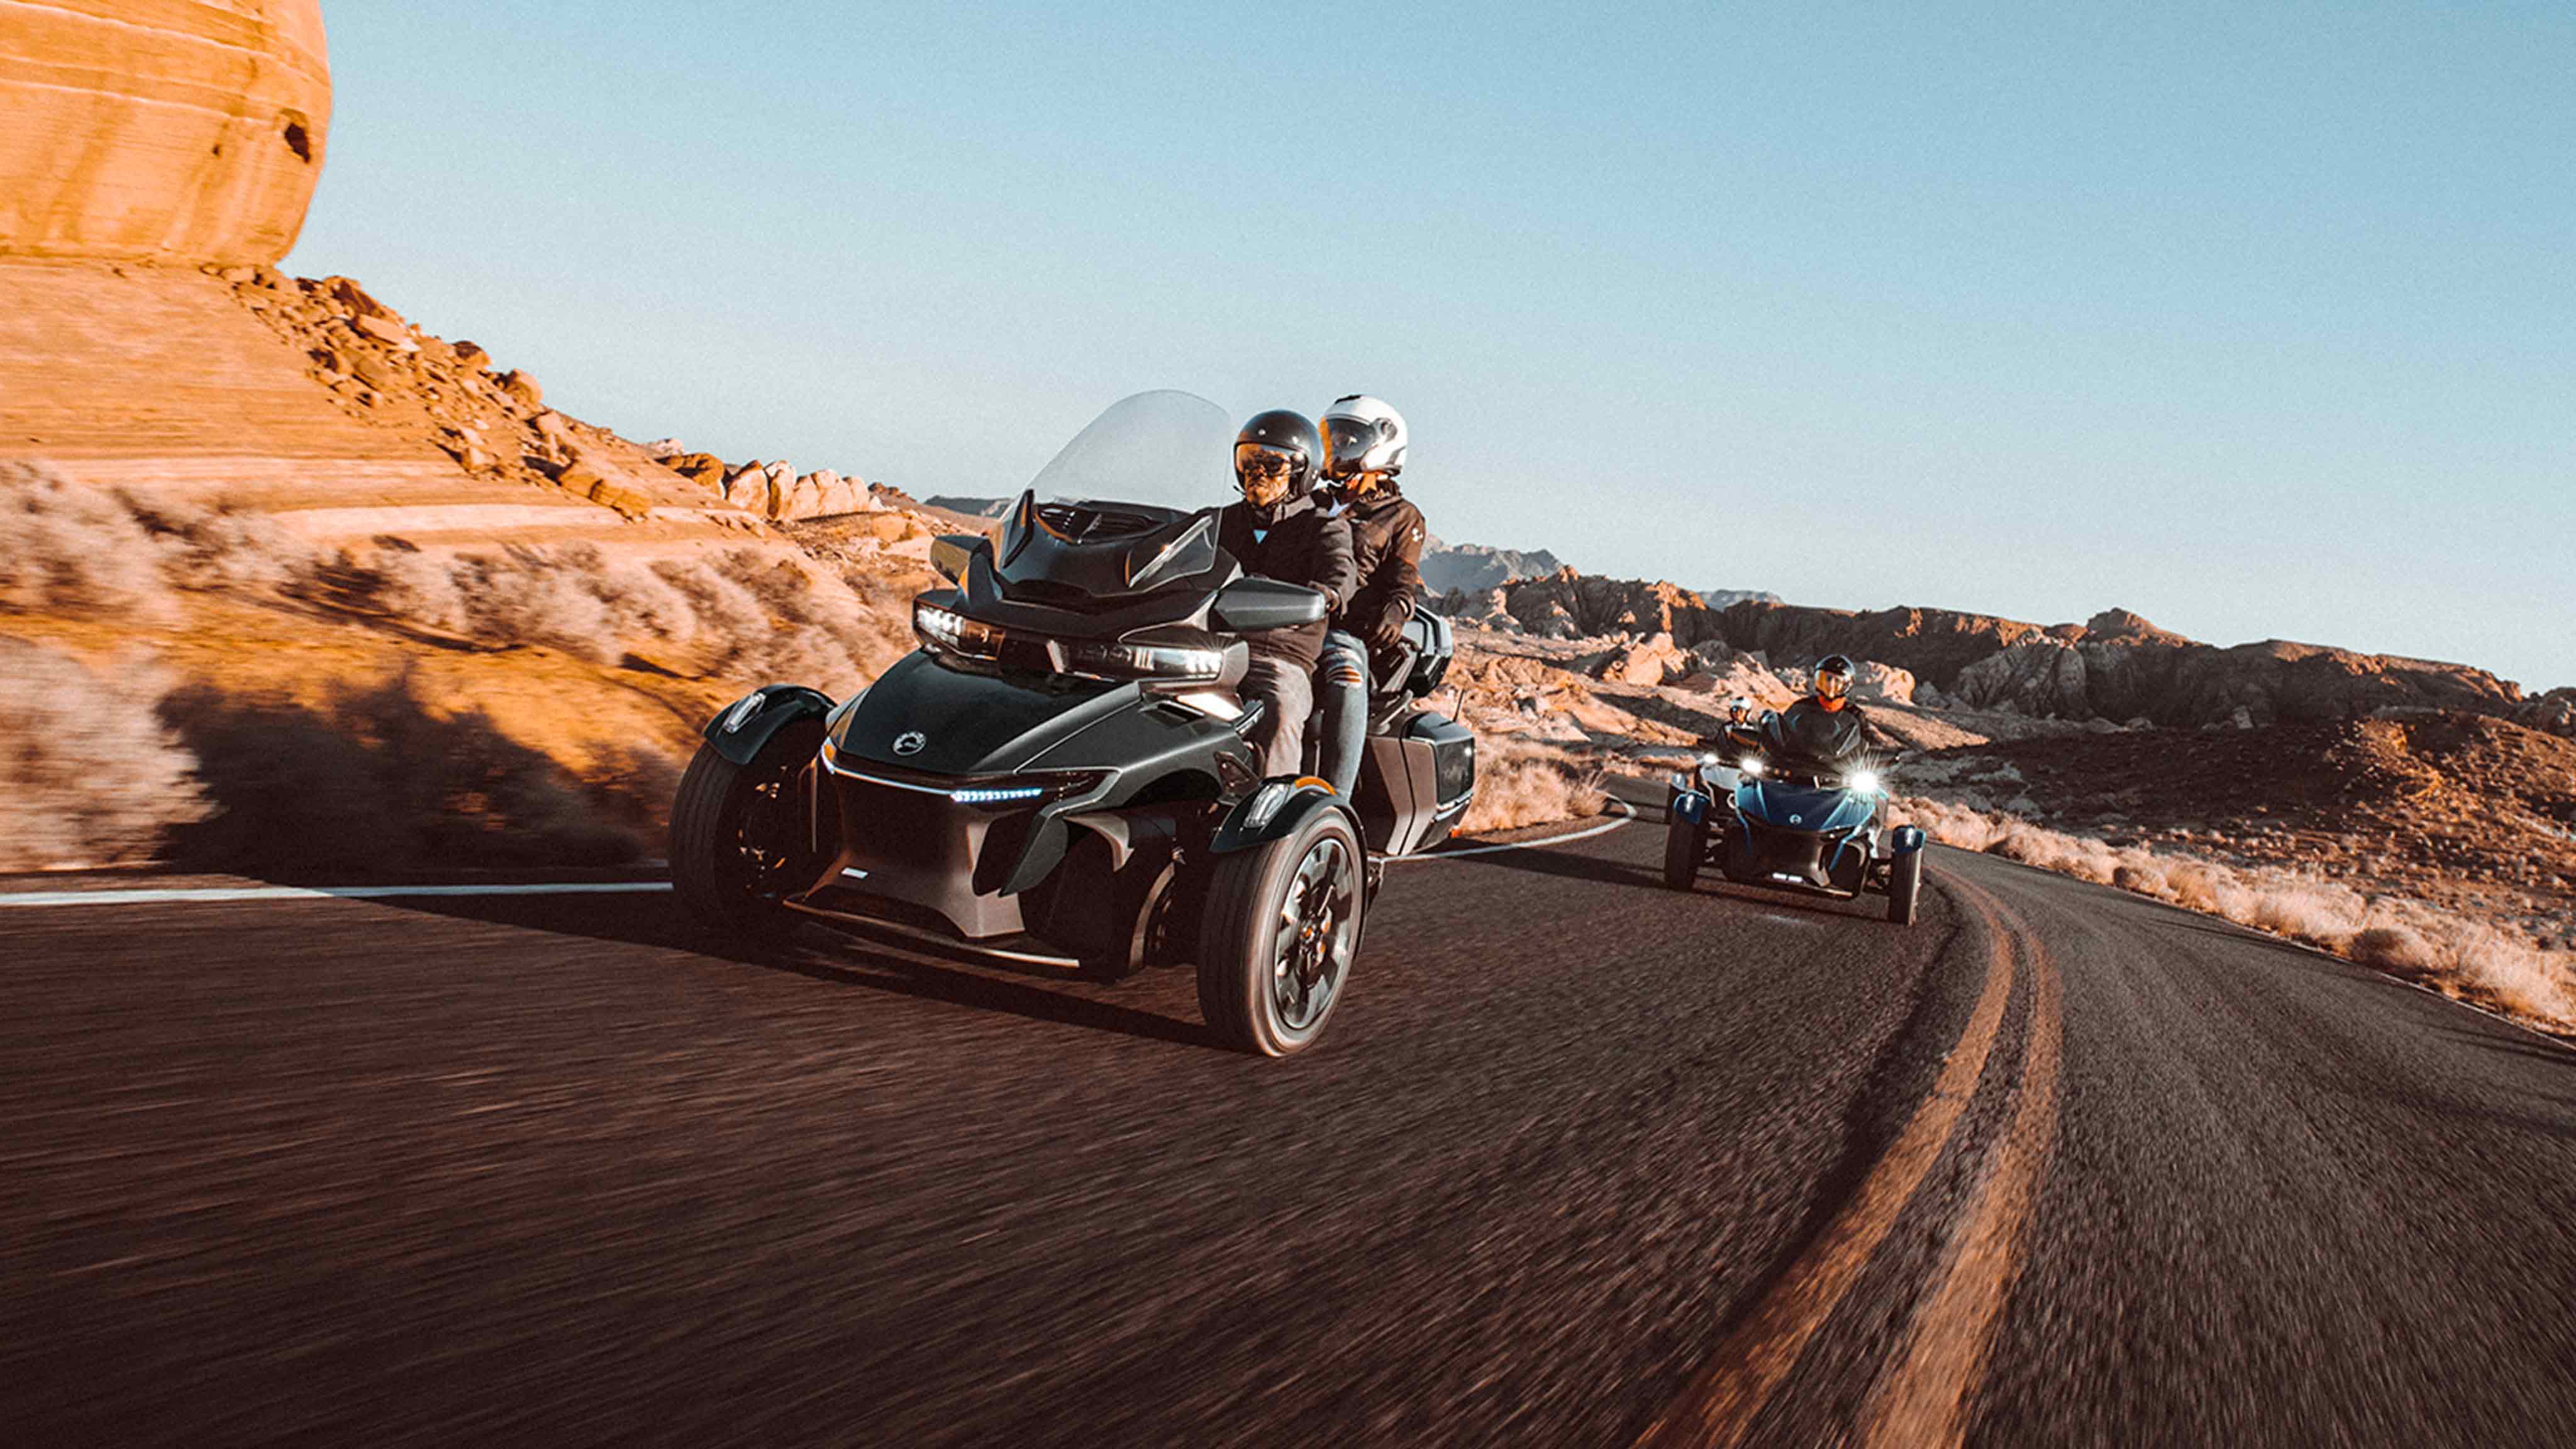 Two Can-Am Spyder vehicles on a roadway